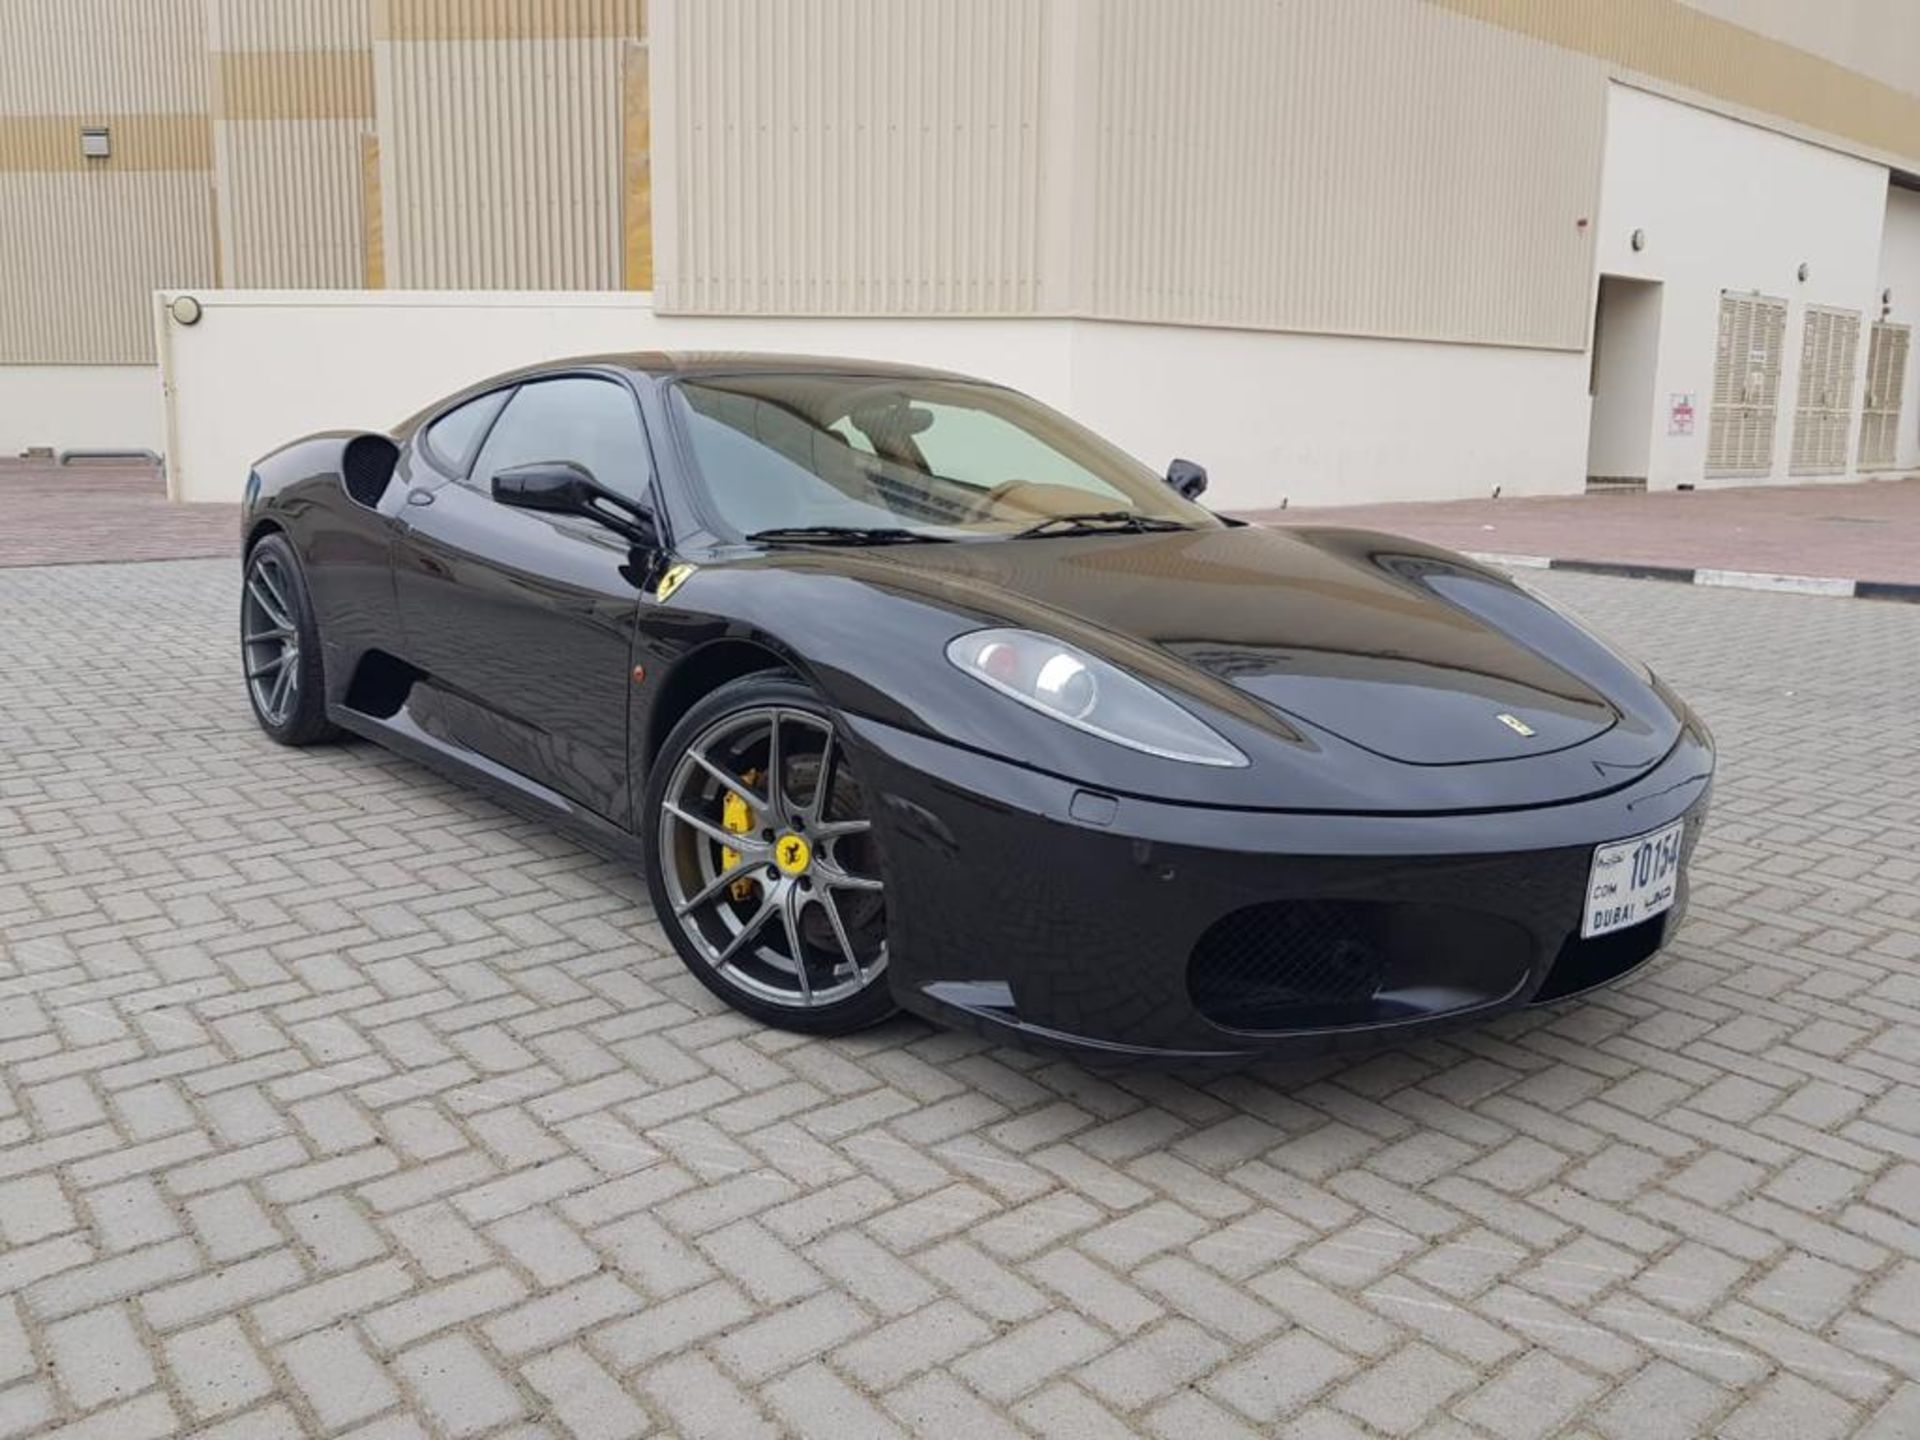 2007 FERRARI F430 BLACK 2 DOOR COUPE 4.3L AUTOMATIC LHD, PERFECT CONDITION INSIDE AND OUT